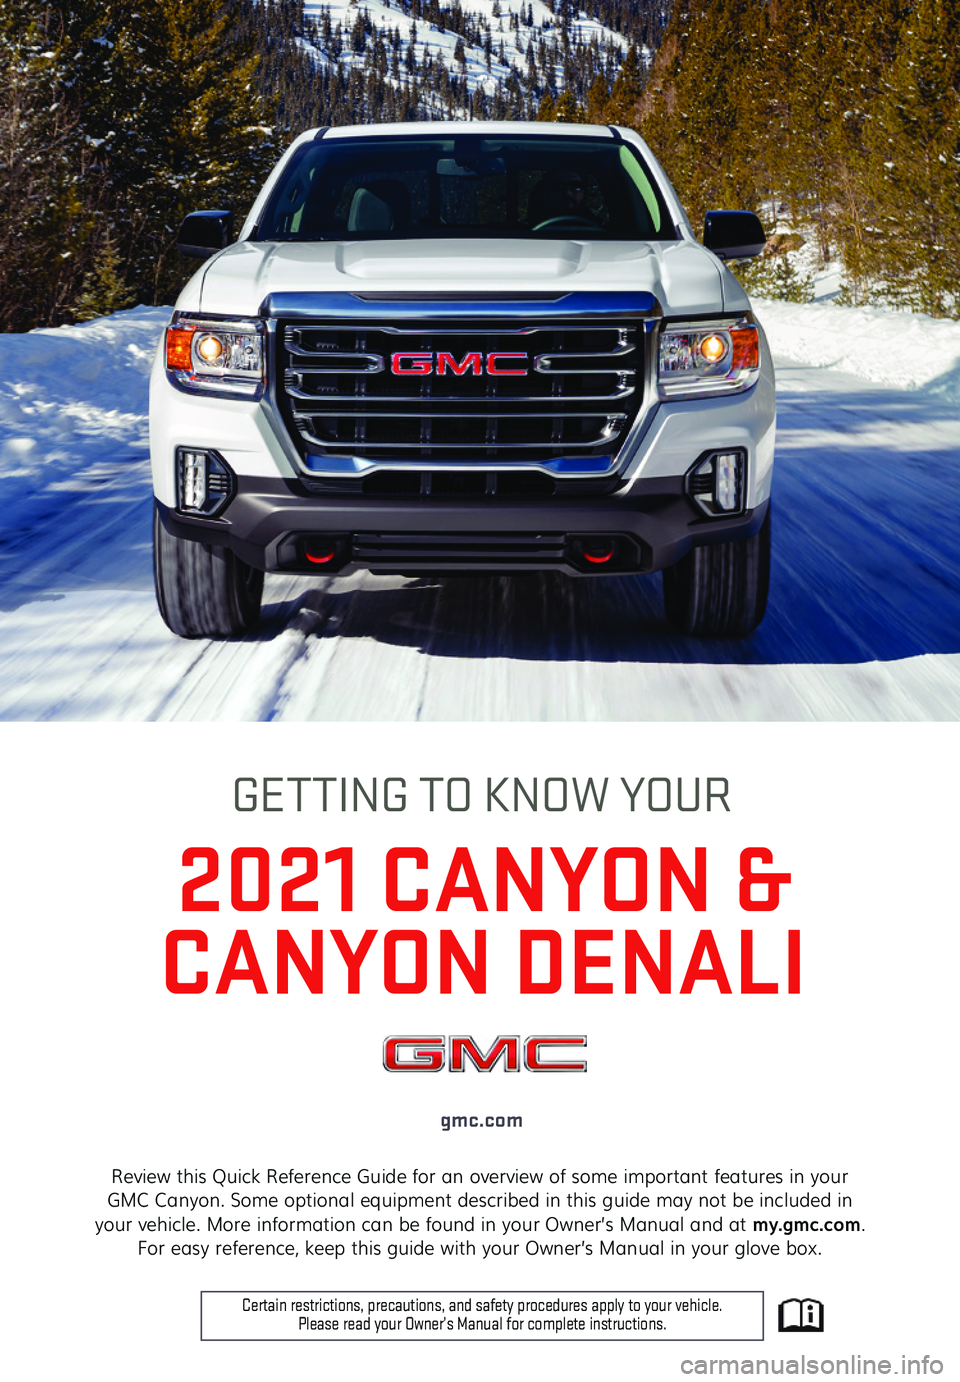 GMC CANYON 2021  Get To Know Guide 1
Review this Quick Reference Guide for an overview of some important features in your  GMC Canyon. Some optional equipment described in this guide may not be included in  your vehicle. More informati